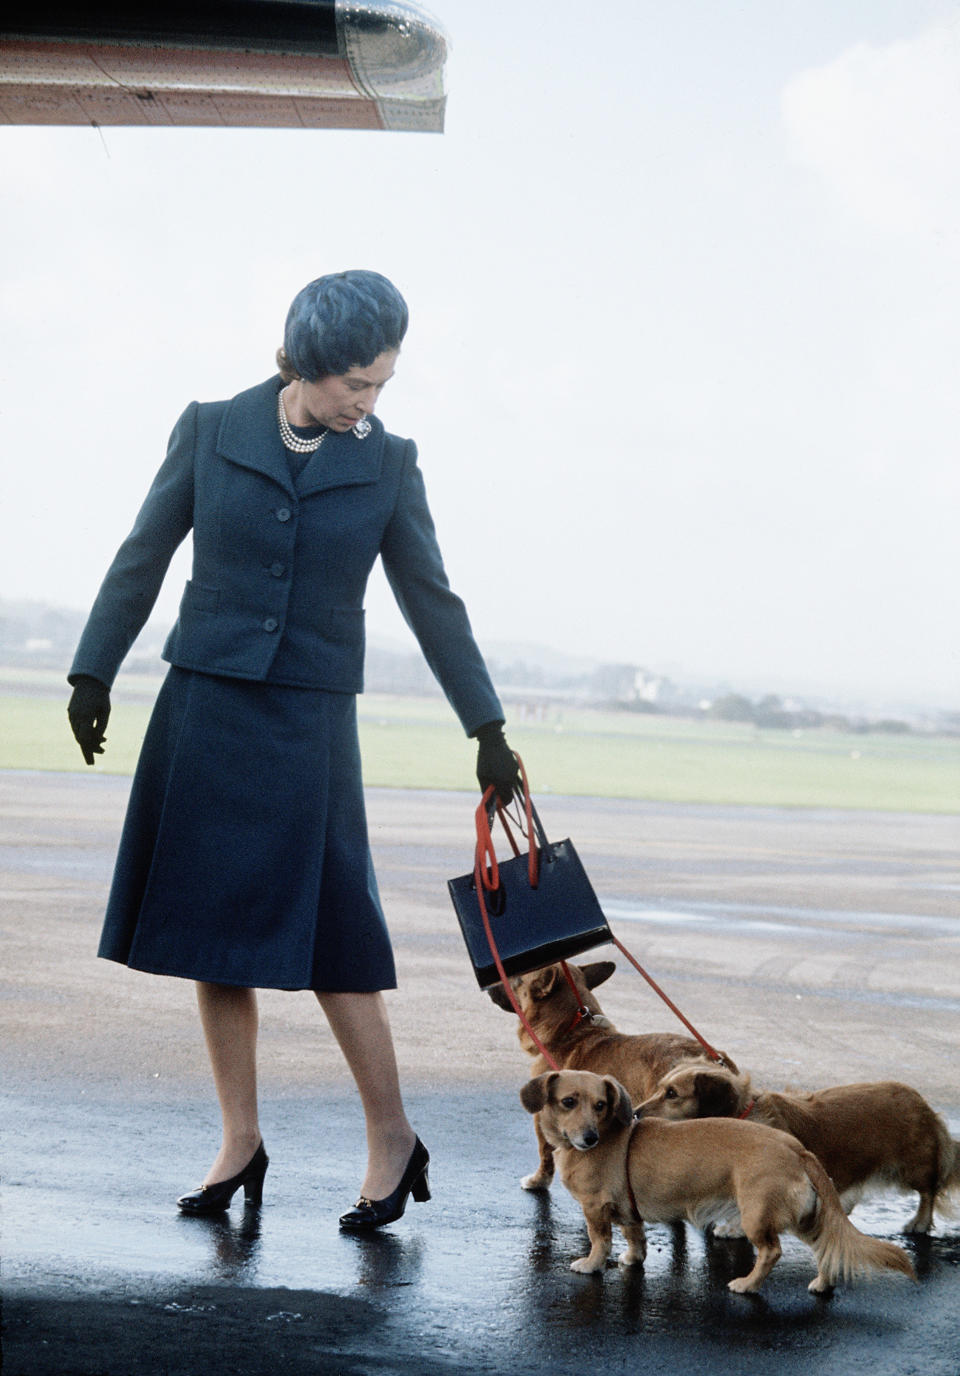 Queen Elizabeth ll arriving at Aberdeen Airport with her corgis to start her holidays in Balmoral, Scotland in 1974. (Getty Images)